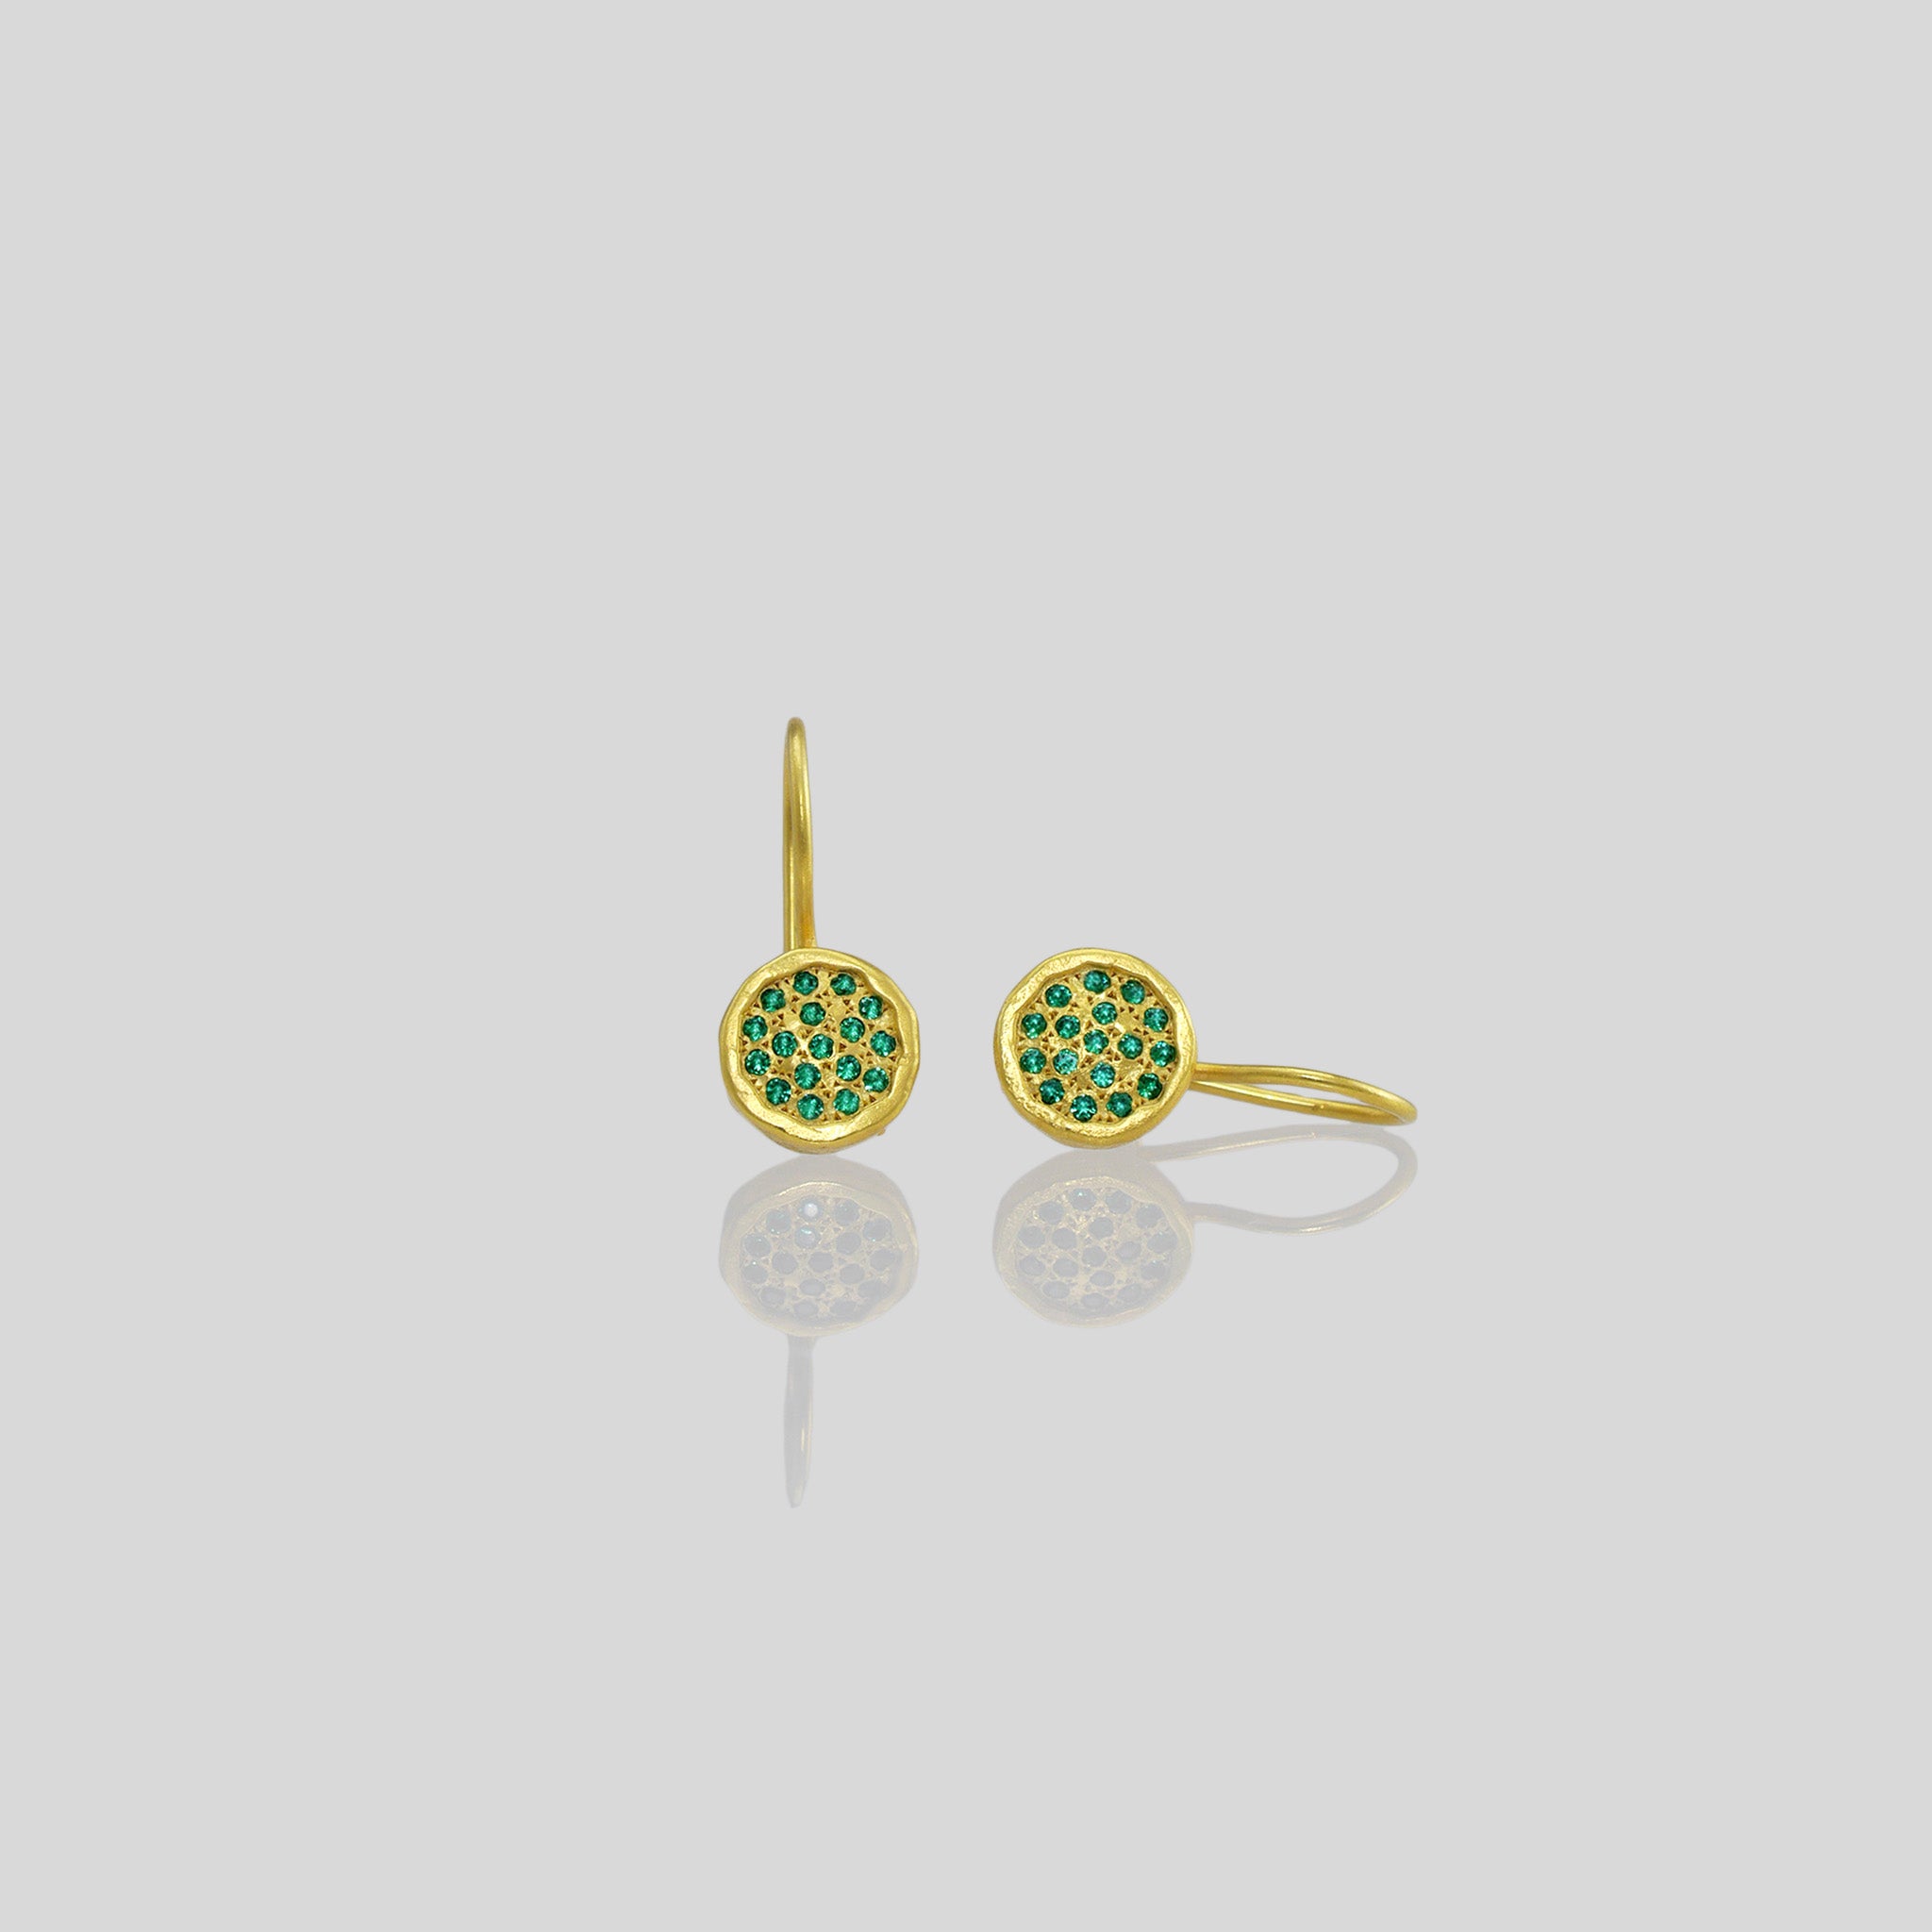 Gold drop earrings adorned with twinkling Emerald gemstones, reminiscent of a starry night sky.